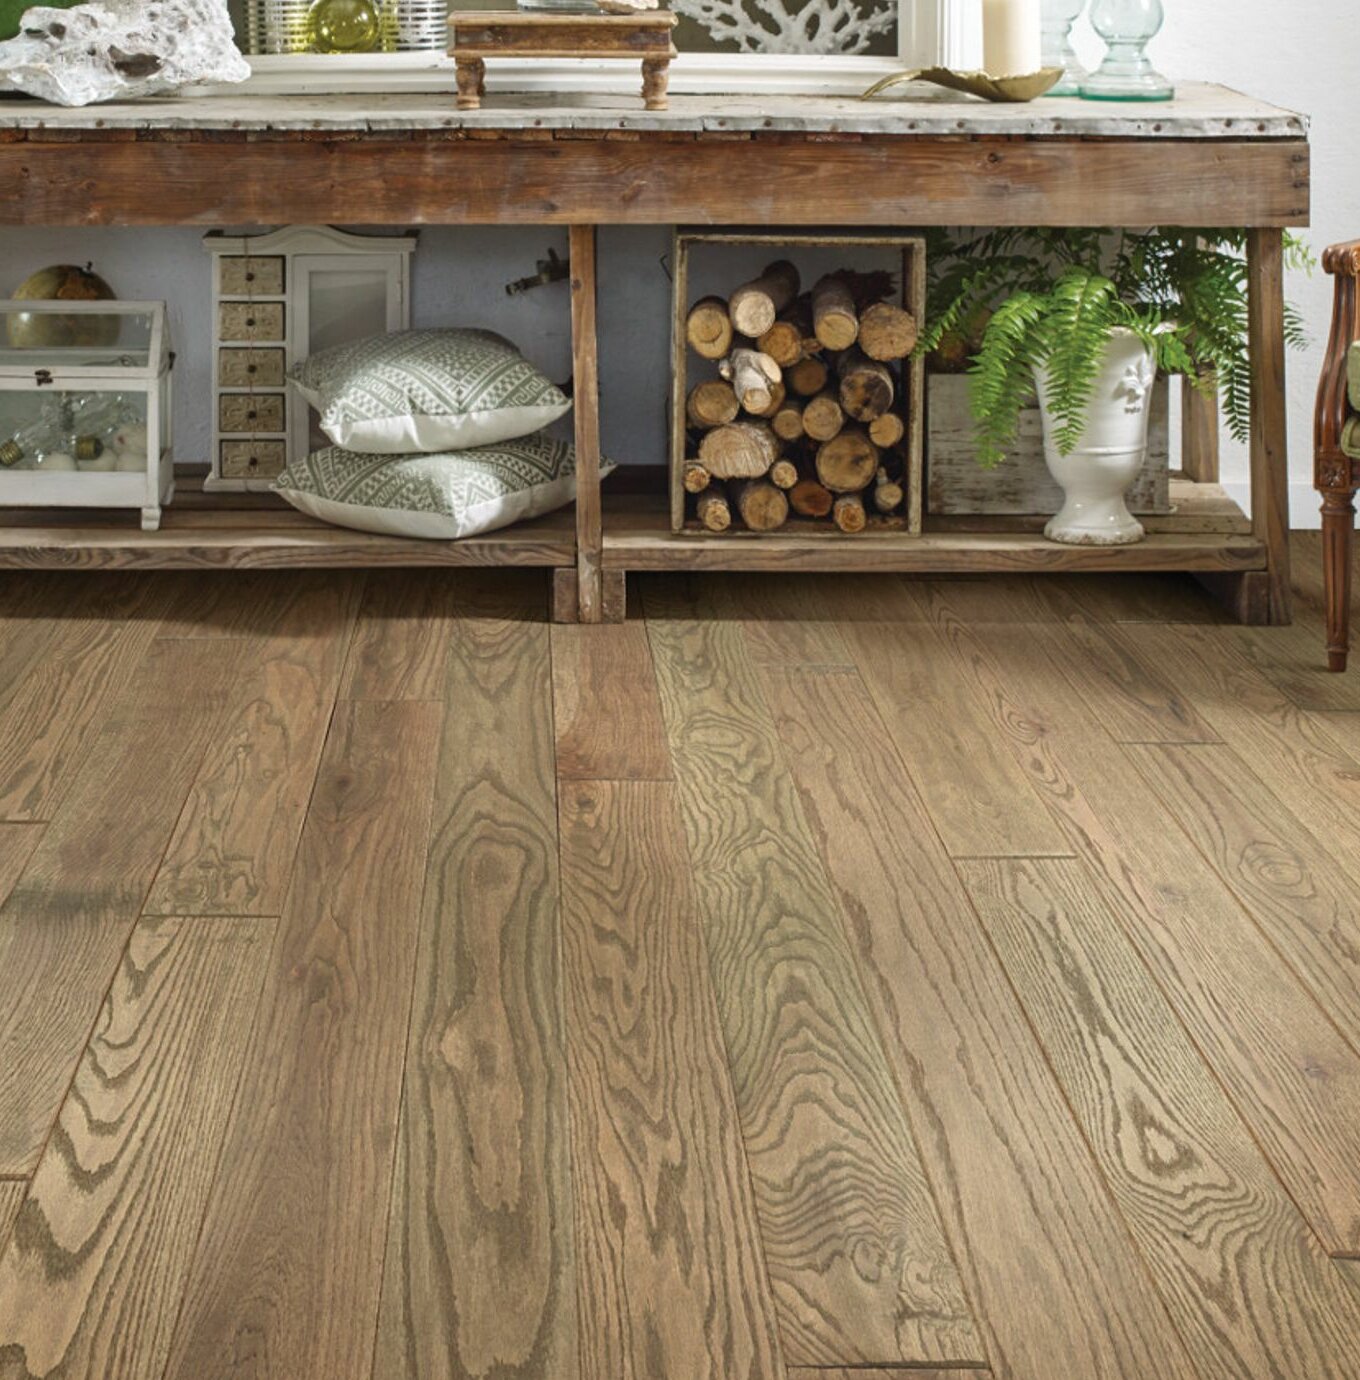 Shaw Floors Mountain Oak 3 8 Thick X 5 Wide X Varying Length